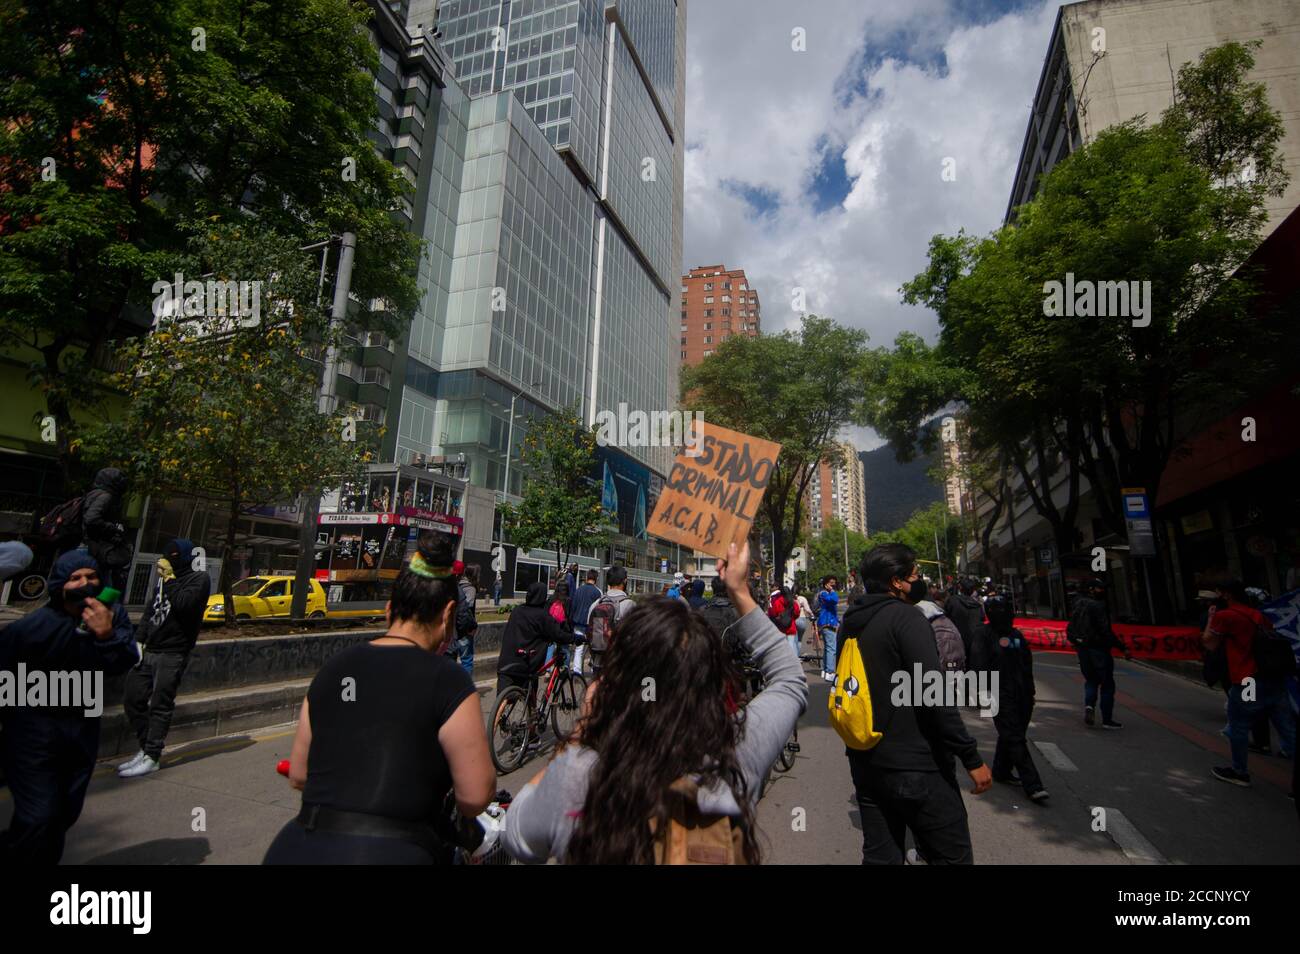 Bogota, Colombia. 23rd Aug, 2020. A demonstrator holds a sign that reads 'The goverment is criminal' during the Memorial Demonstrations for Dilan Cruz on August 23 2020 in Bogota, Colombia. Dilan Cruz was a high school student who was shot by a riot police officer during the 2019 national strike in Colombia, on the demonstrations that took place on november 23 2019. (Photo by Sebastian Barros Salamanca/Pacific Press) Credit: Pacific Press Media Production Corp./Alamy Live News Stock Photo